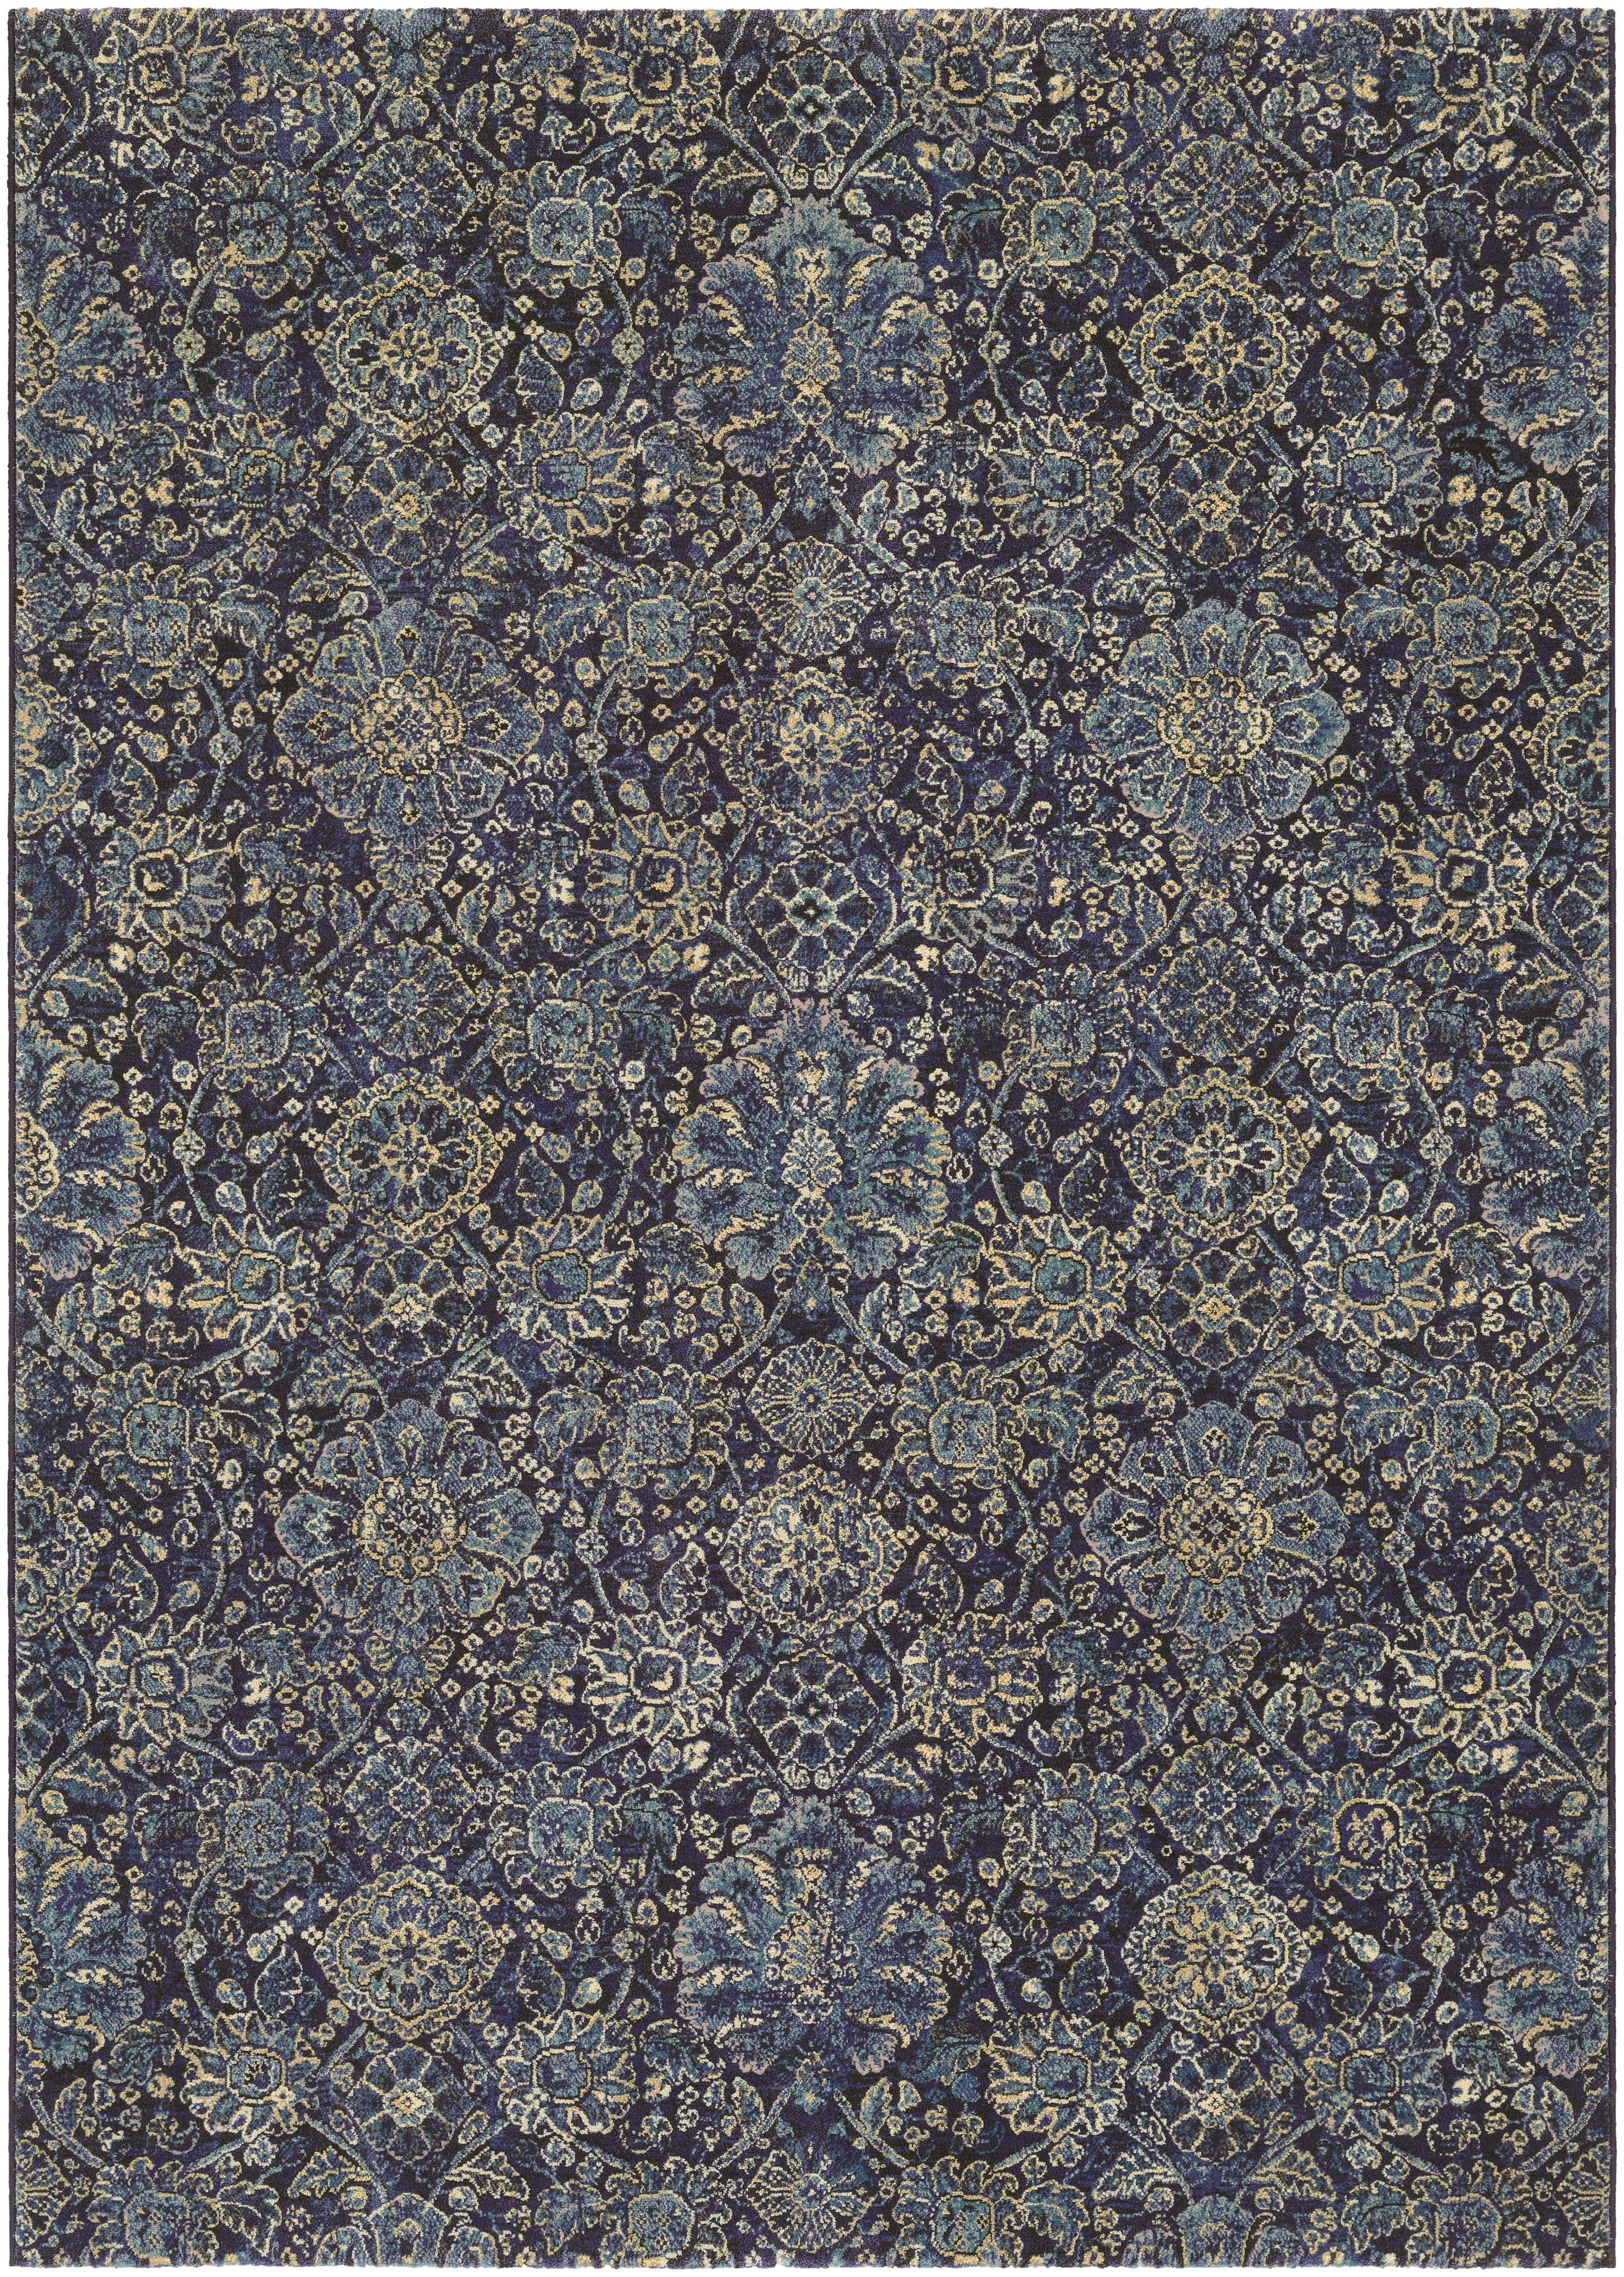 Easton Transitional Navy-Sapphire Washable Area Rug, 2' x 3'7"